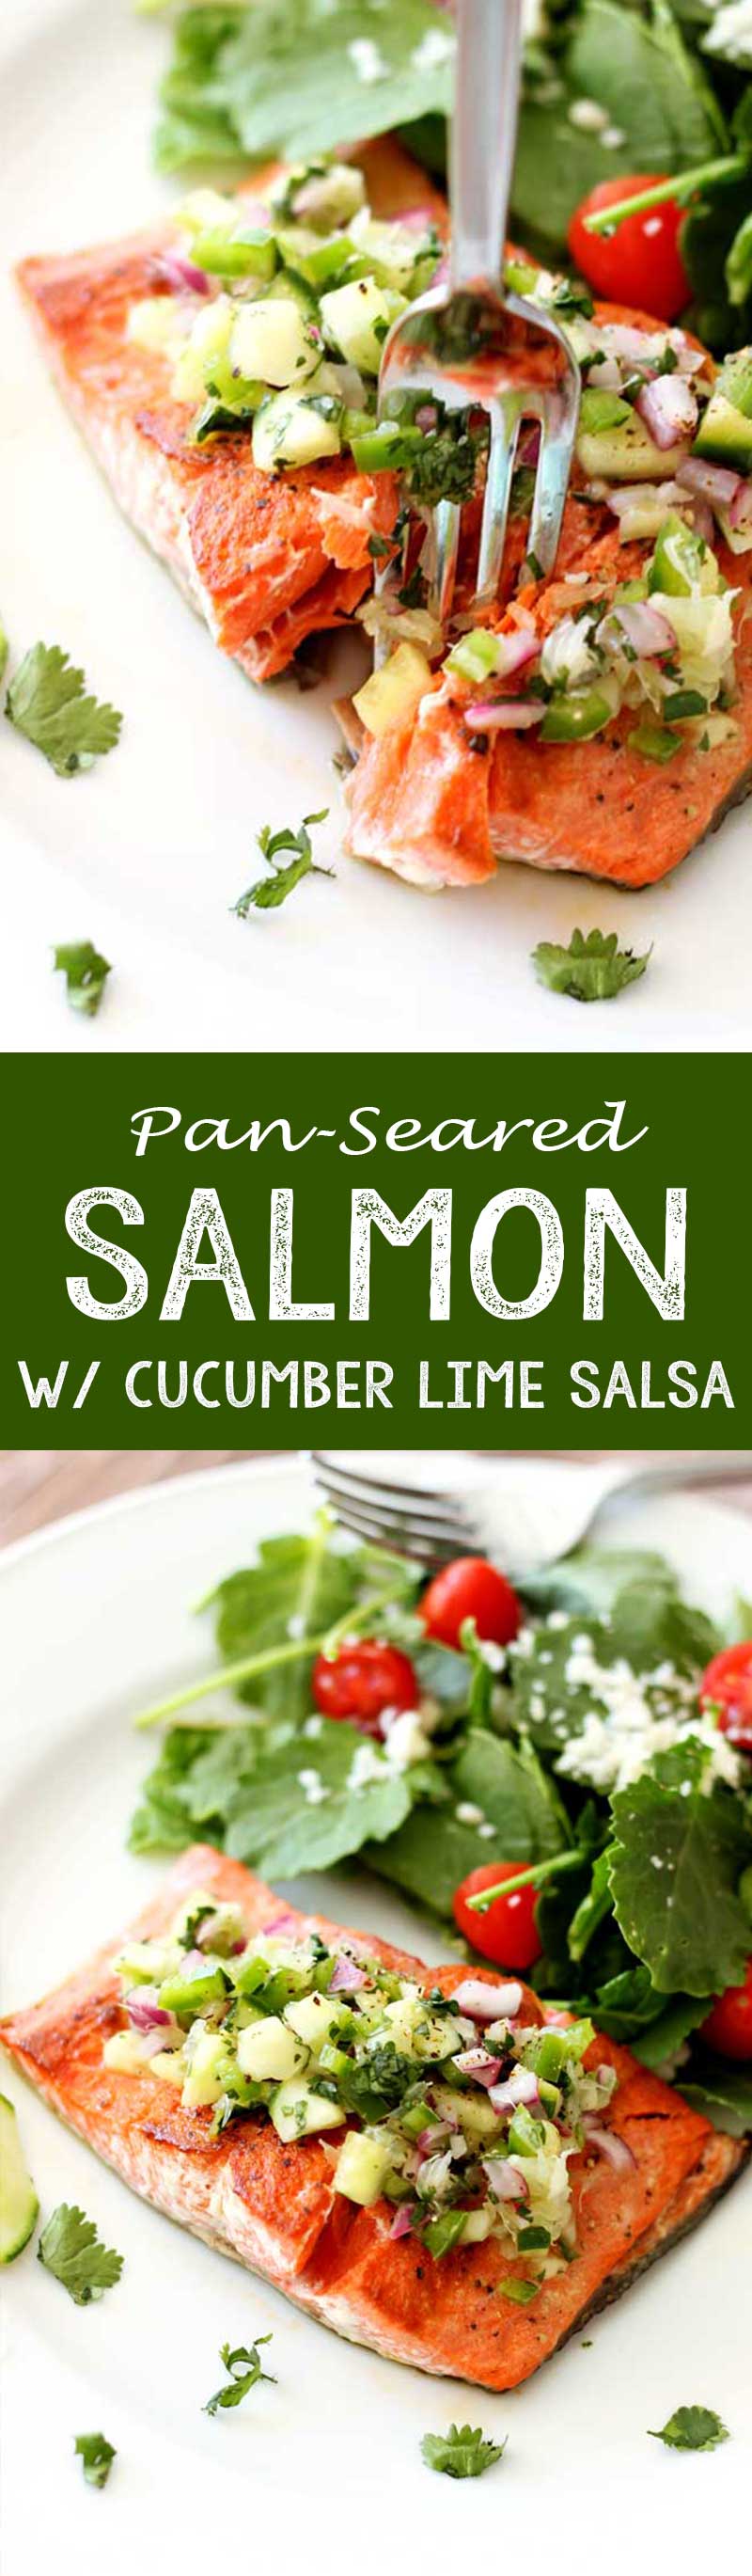 This was the easiest weeknight meal ever. Pan Seared Salmon with cucumber lime salmon